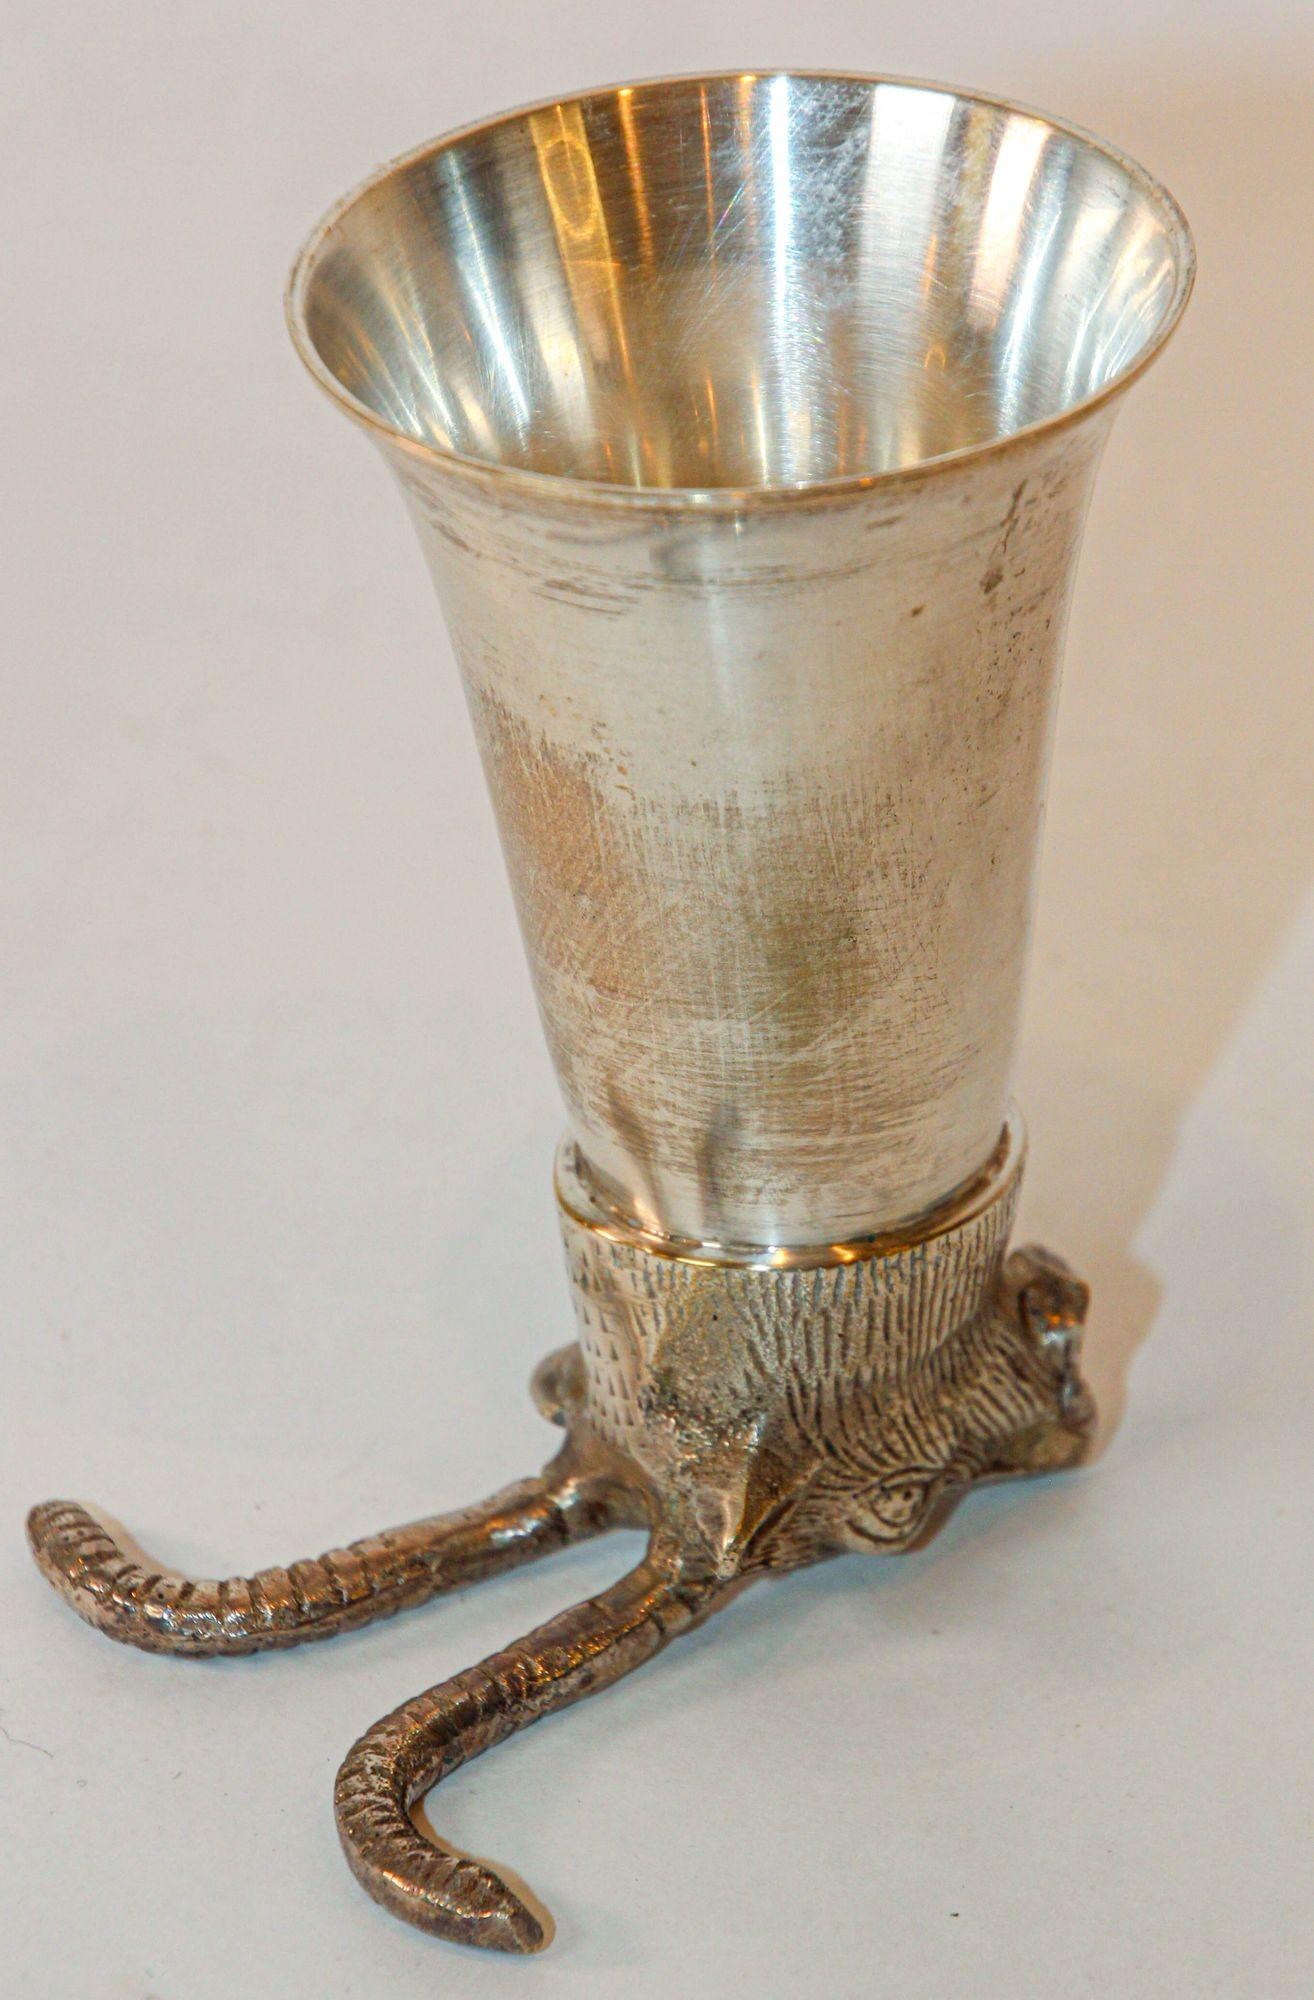 Vintage Silver Stirrup Cup Goblet Antelope Head Hunting Equestrian Barware Decor 1970s.
1970s Stirrup Cup With The Head of A Deer or Antelope.
Silver plated deer head with antlers stirrup cup.
The stirrup cup can be displayed on their base and